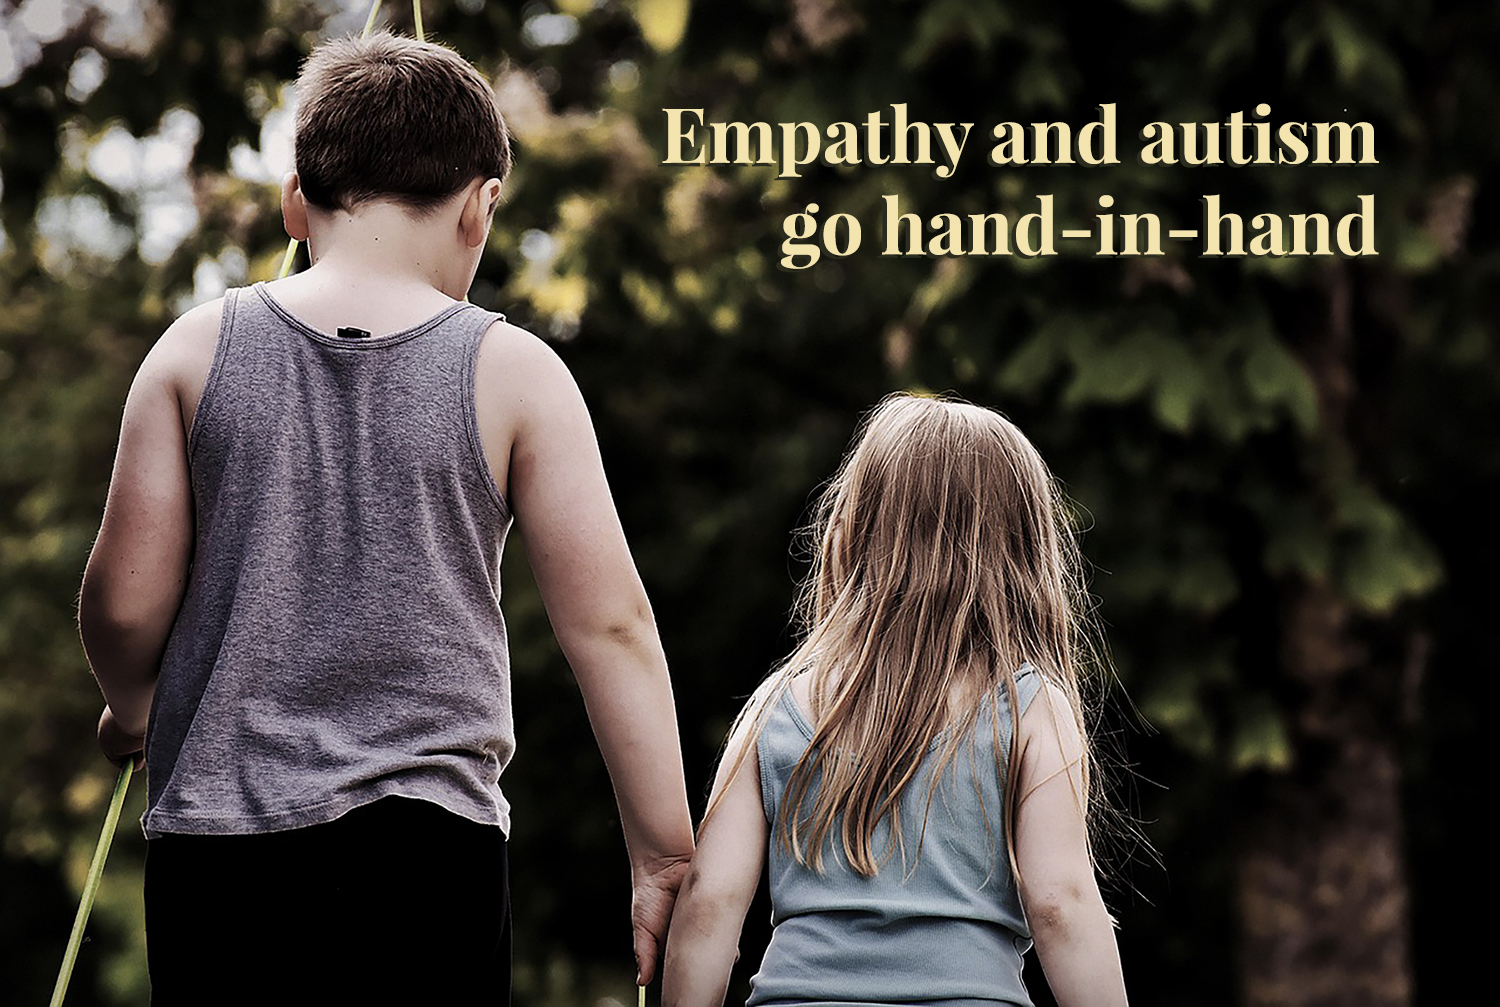 Guest blogger Lisa Pelissier explains that empathy and autism are not mutually exclusive and gives tips for parents on promoting empathy.